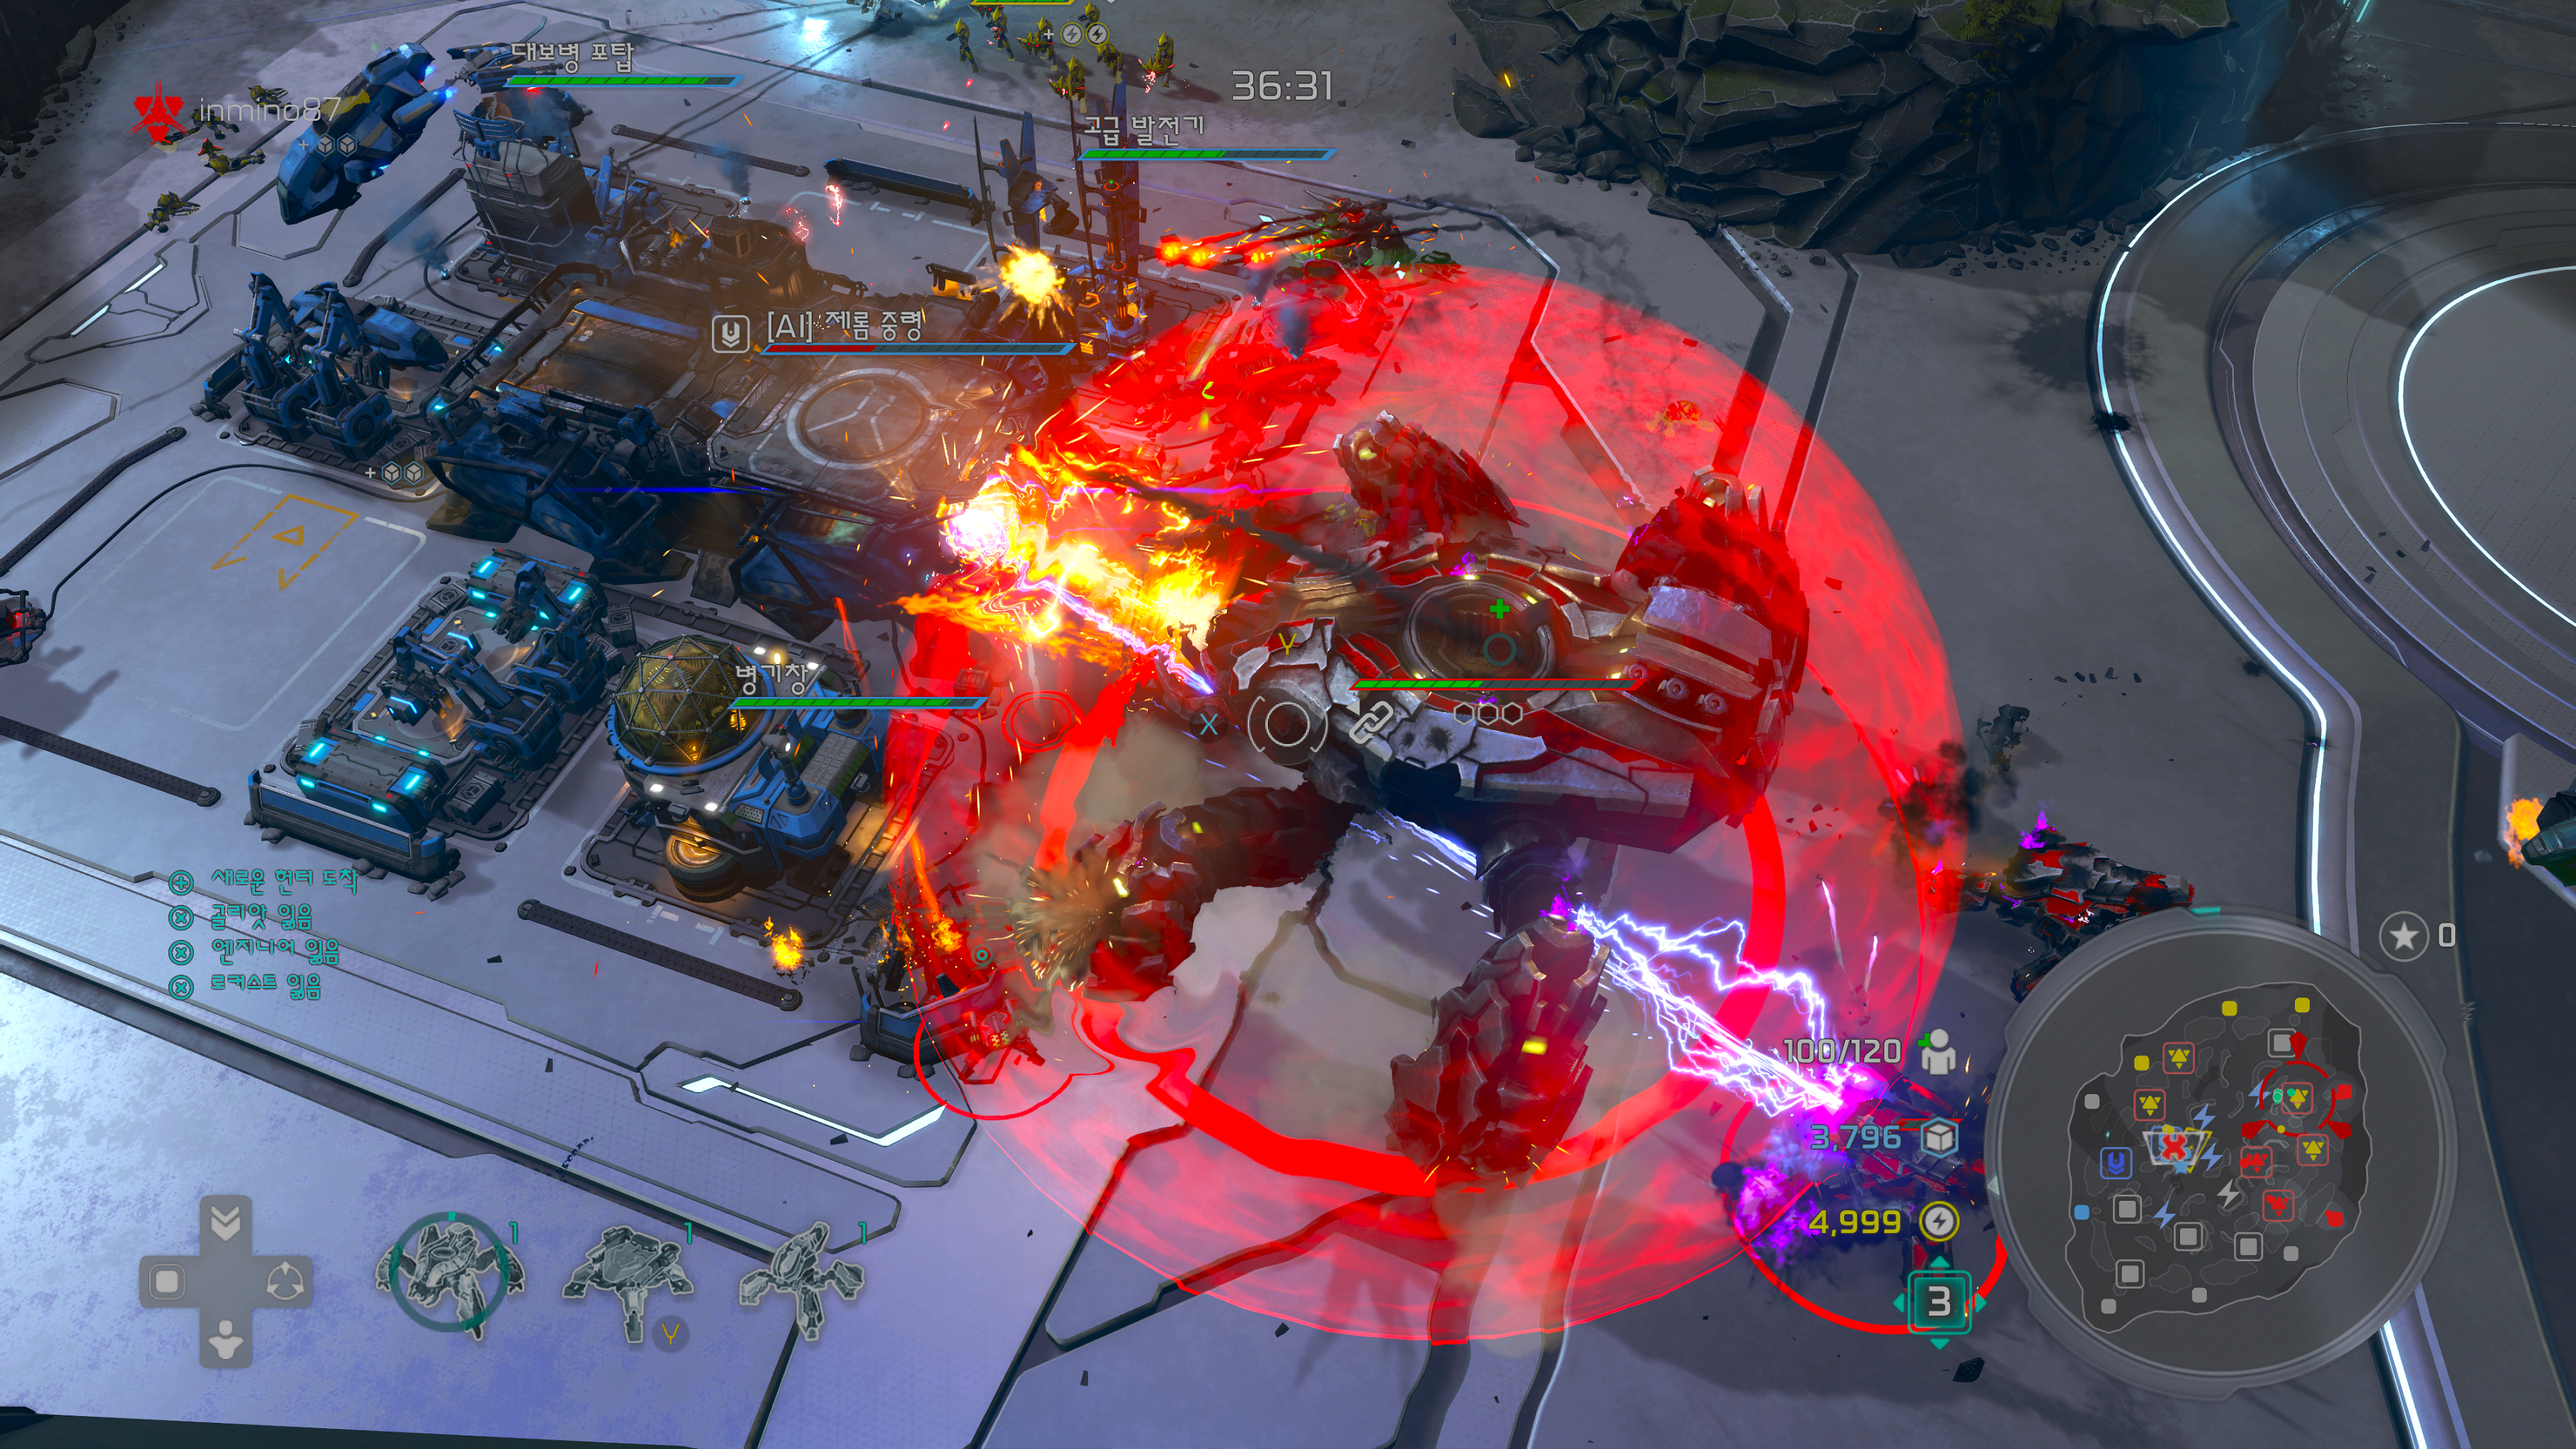 Halo Wars 2 2020-07-28 21-59-22.png